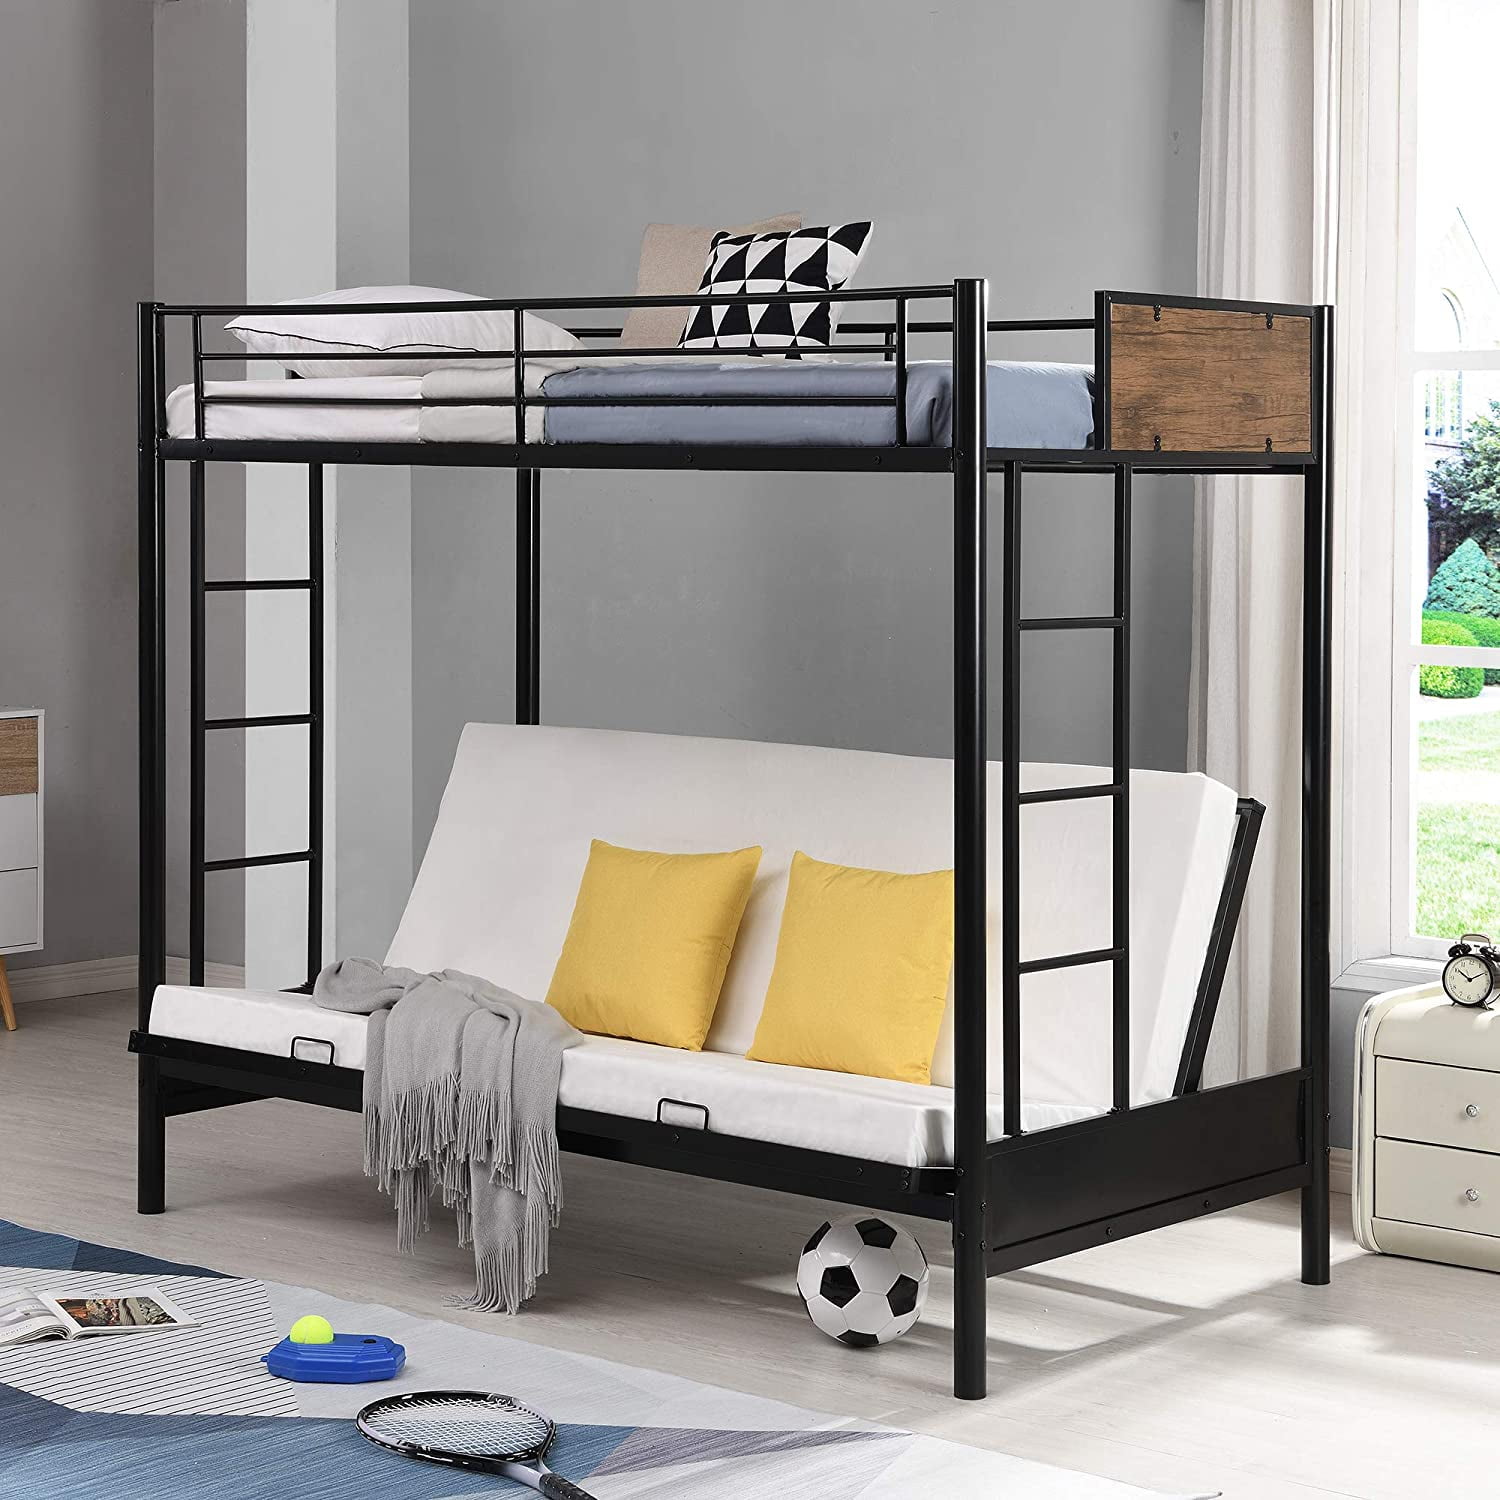 Piscis Convertible Twin Over Futon Bed, Bunk Beds With Full Bed On Bottom